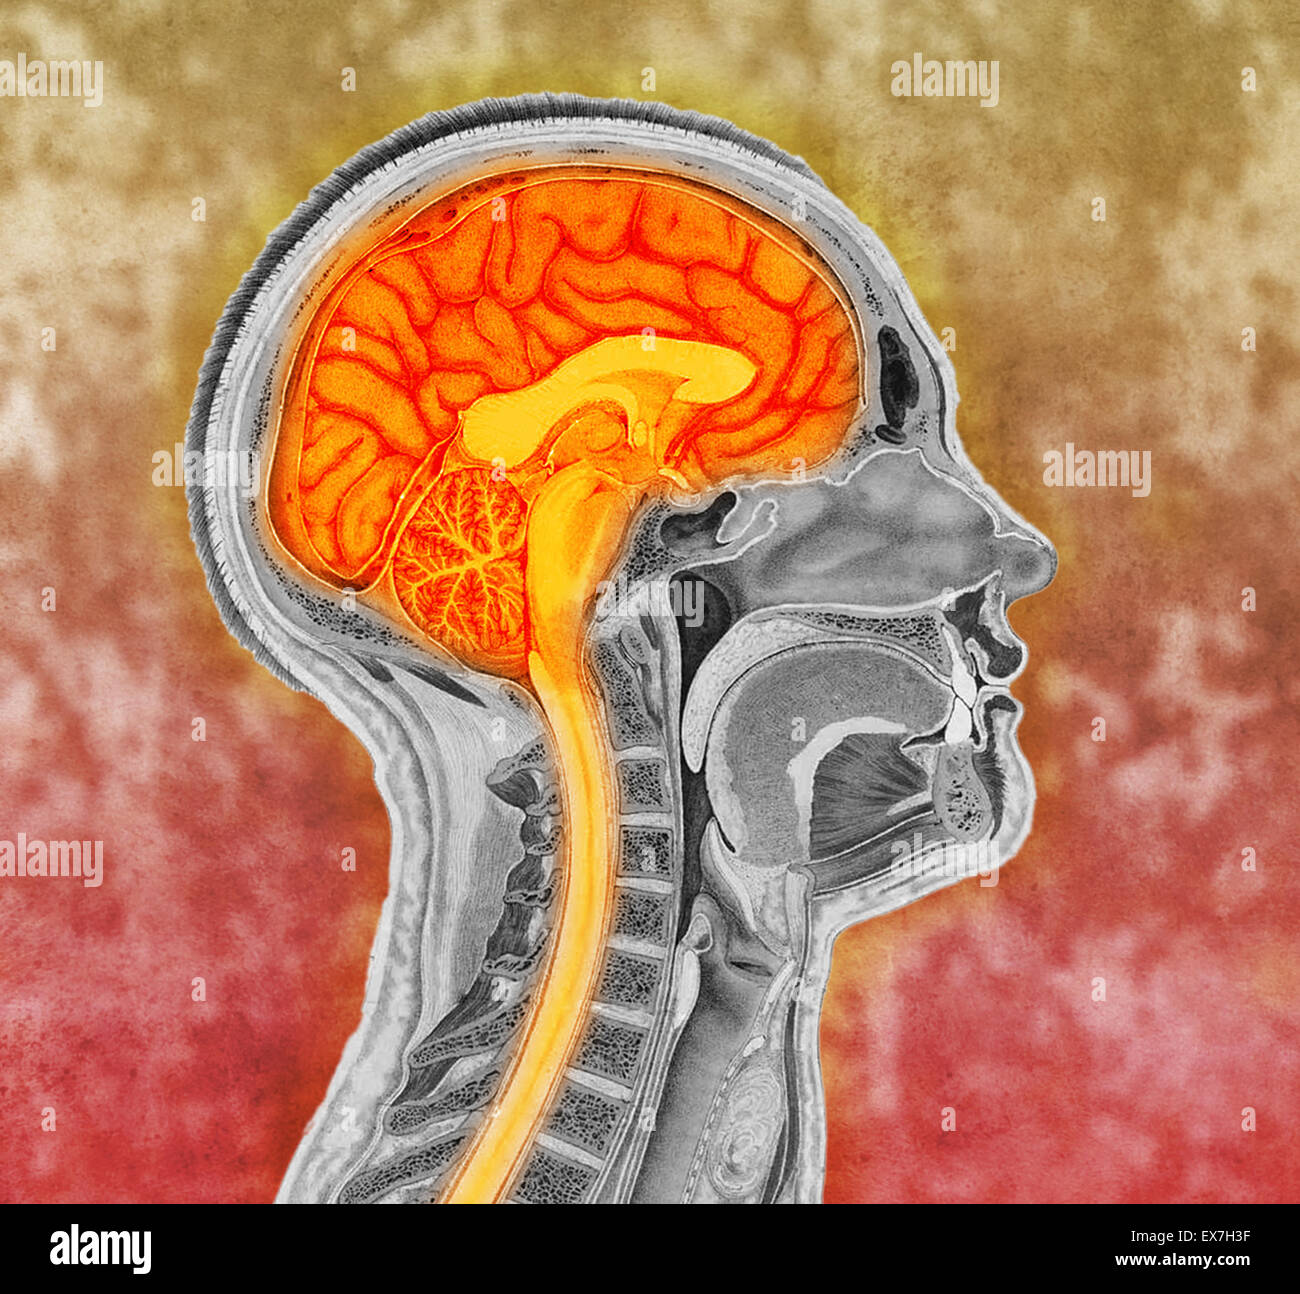 colorized antique illustration of the human brain Stock Photo